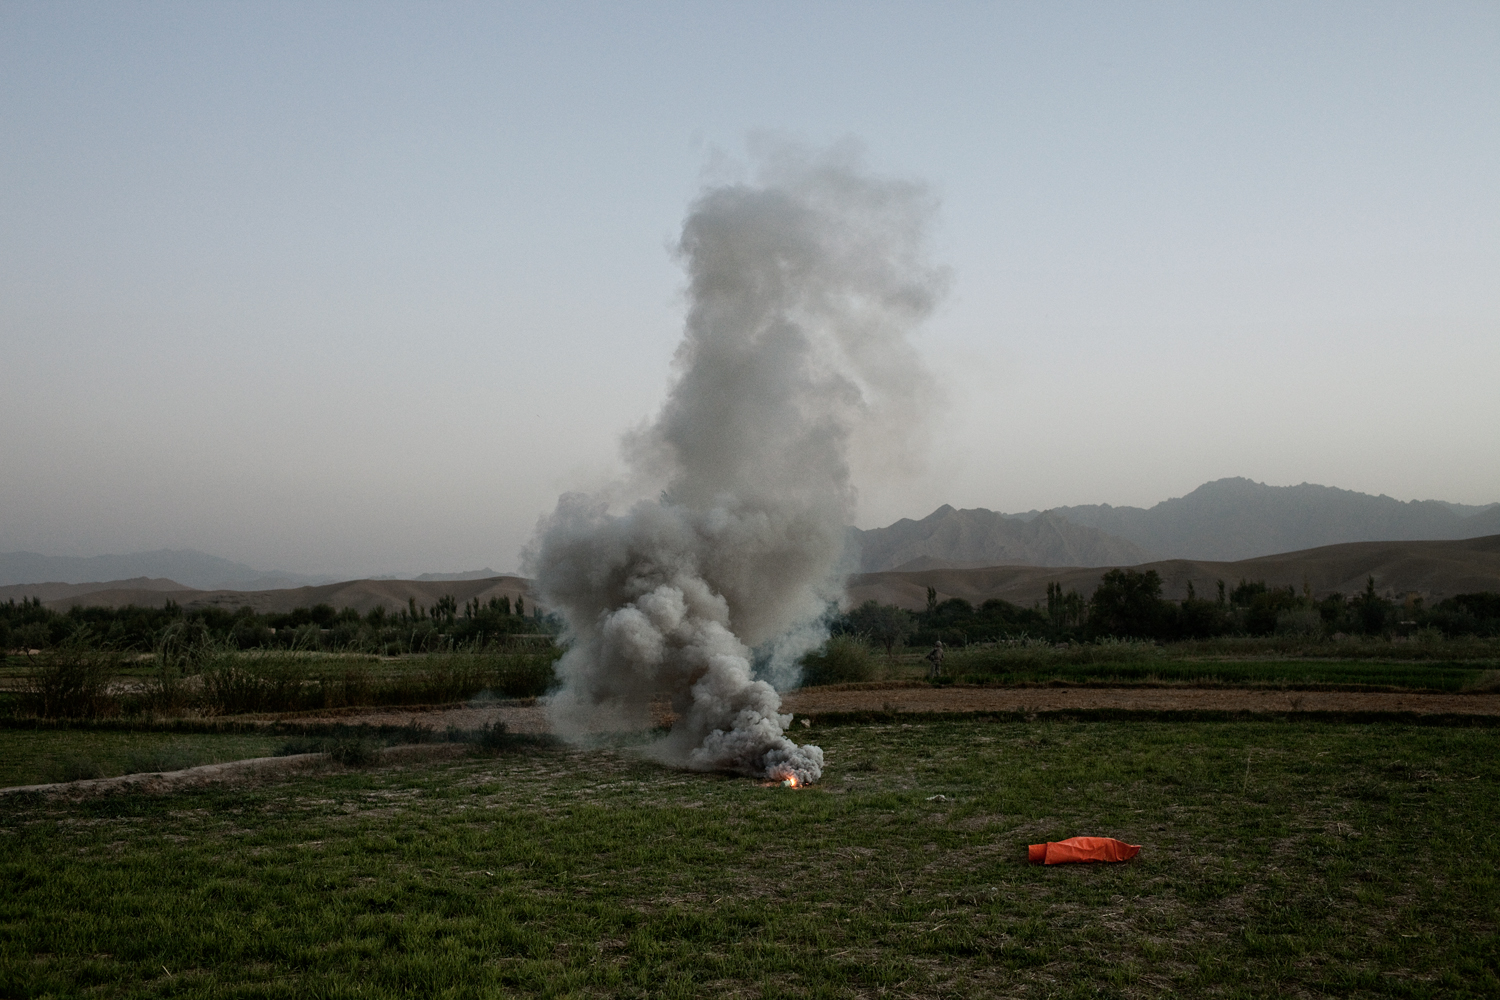  A flare marks a landing zone for medical evacuation helicopters after three U.S. Army Soldiers were injured in an improvised explosive device attack in the Tangi Valley, Wardak Province,&nbsp;Afghanistan.    